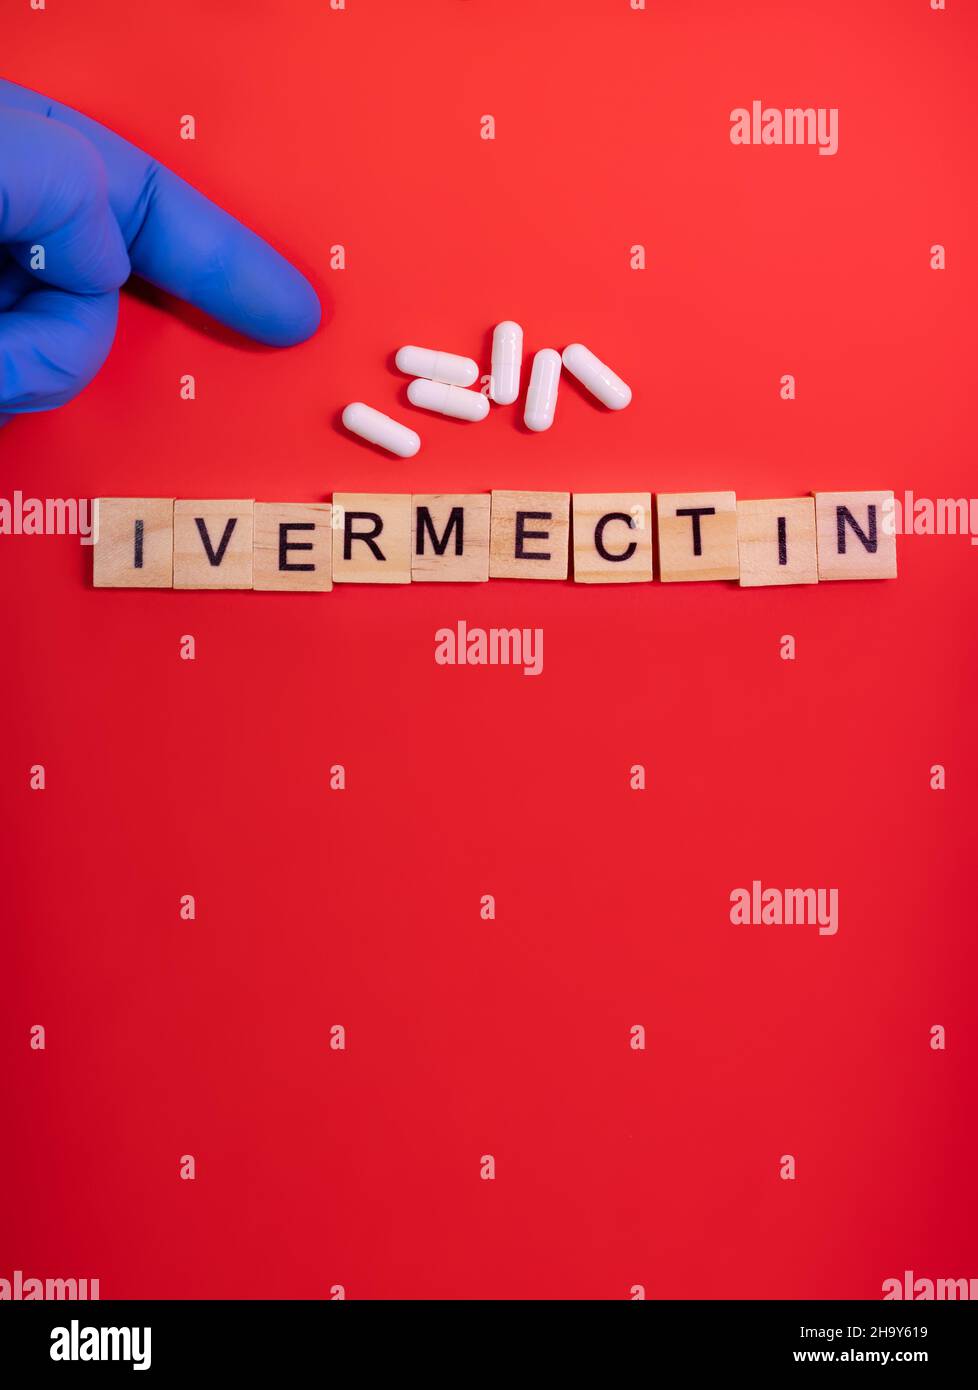 Ivermectin on colored red paper texture background. Ivermectin antiparasitic medication. Off label approved medicine drugs use. Covid-19 therapy. Phar Stock Photo